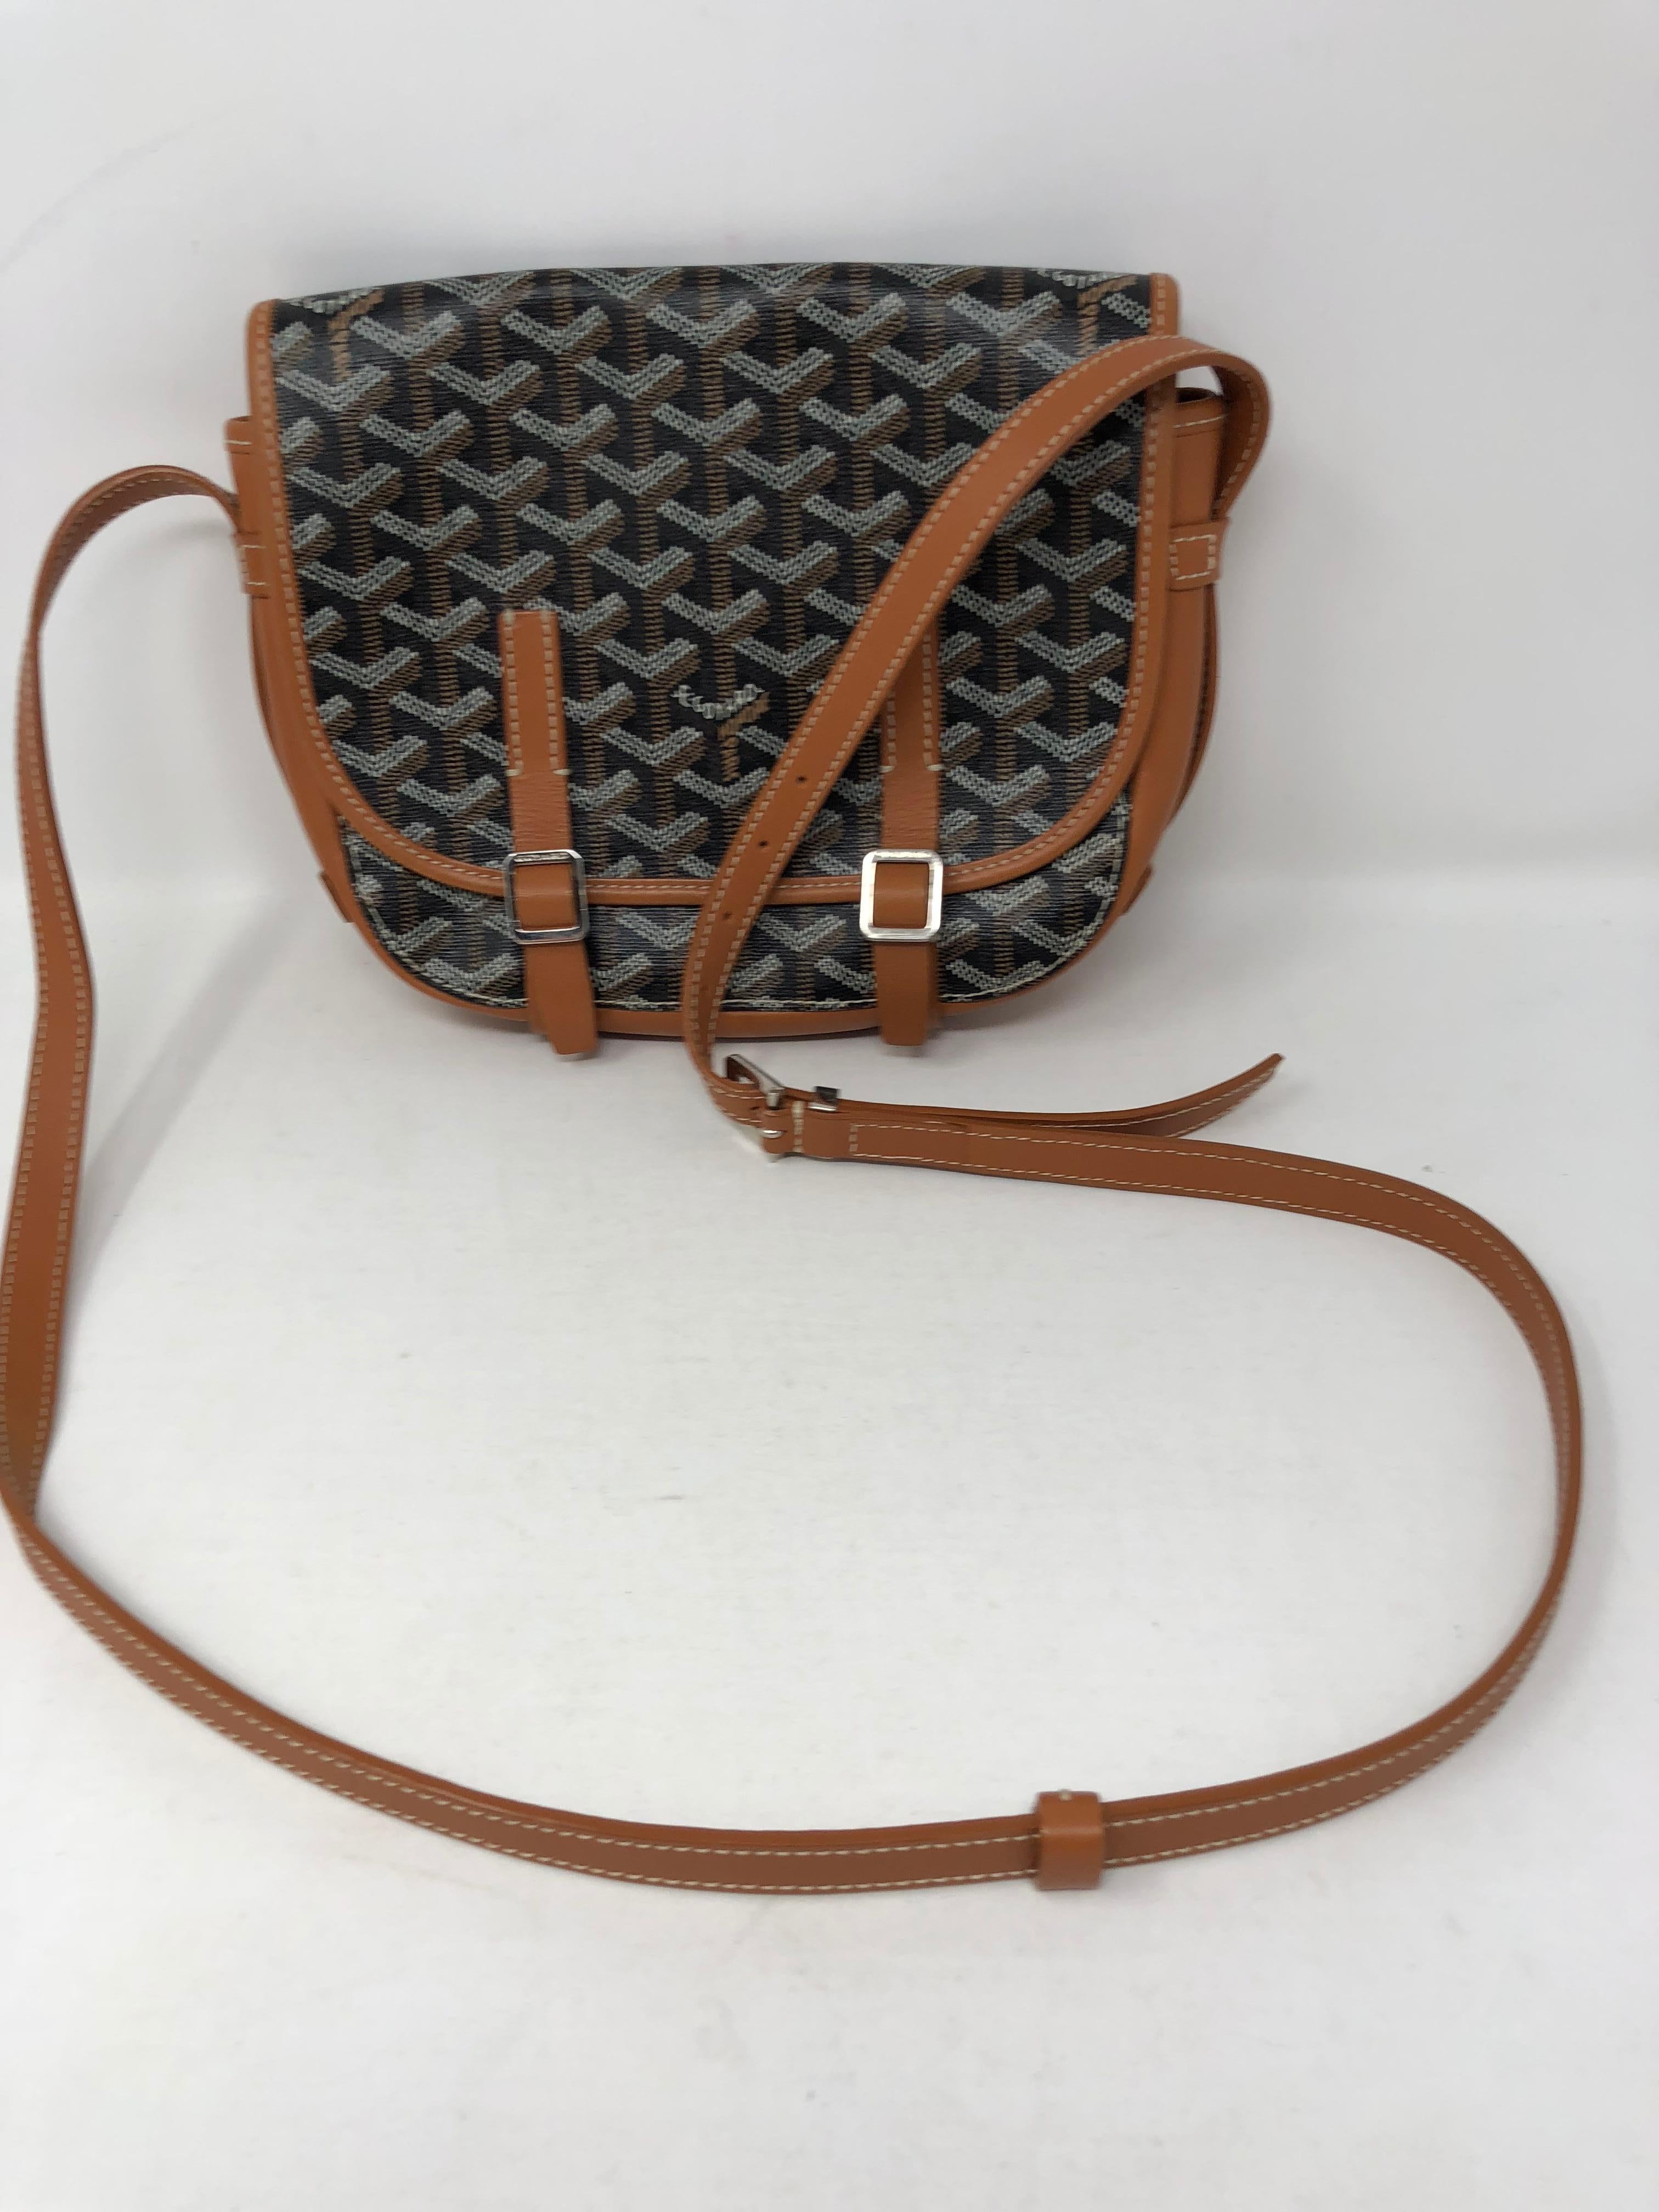 Goyard Black Belvedere Crossbody. Black and multicolor stenciled Goyardine coated canvas with palladium hardware. Tan leather trim and strap. Mint condition. Guaranteed authentic. 